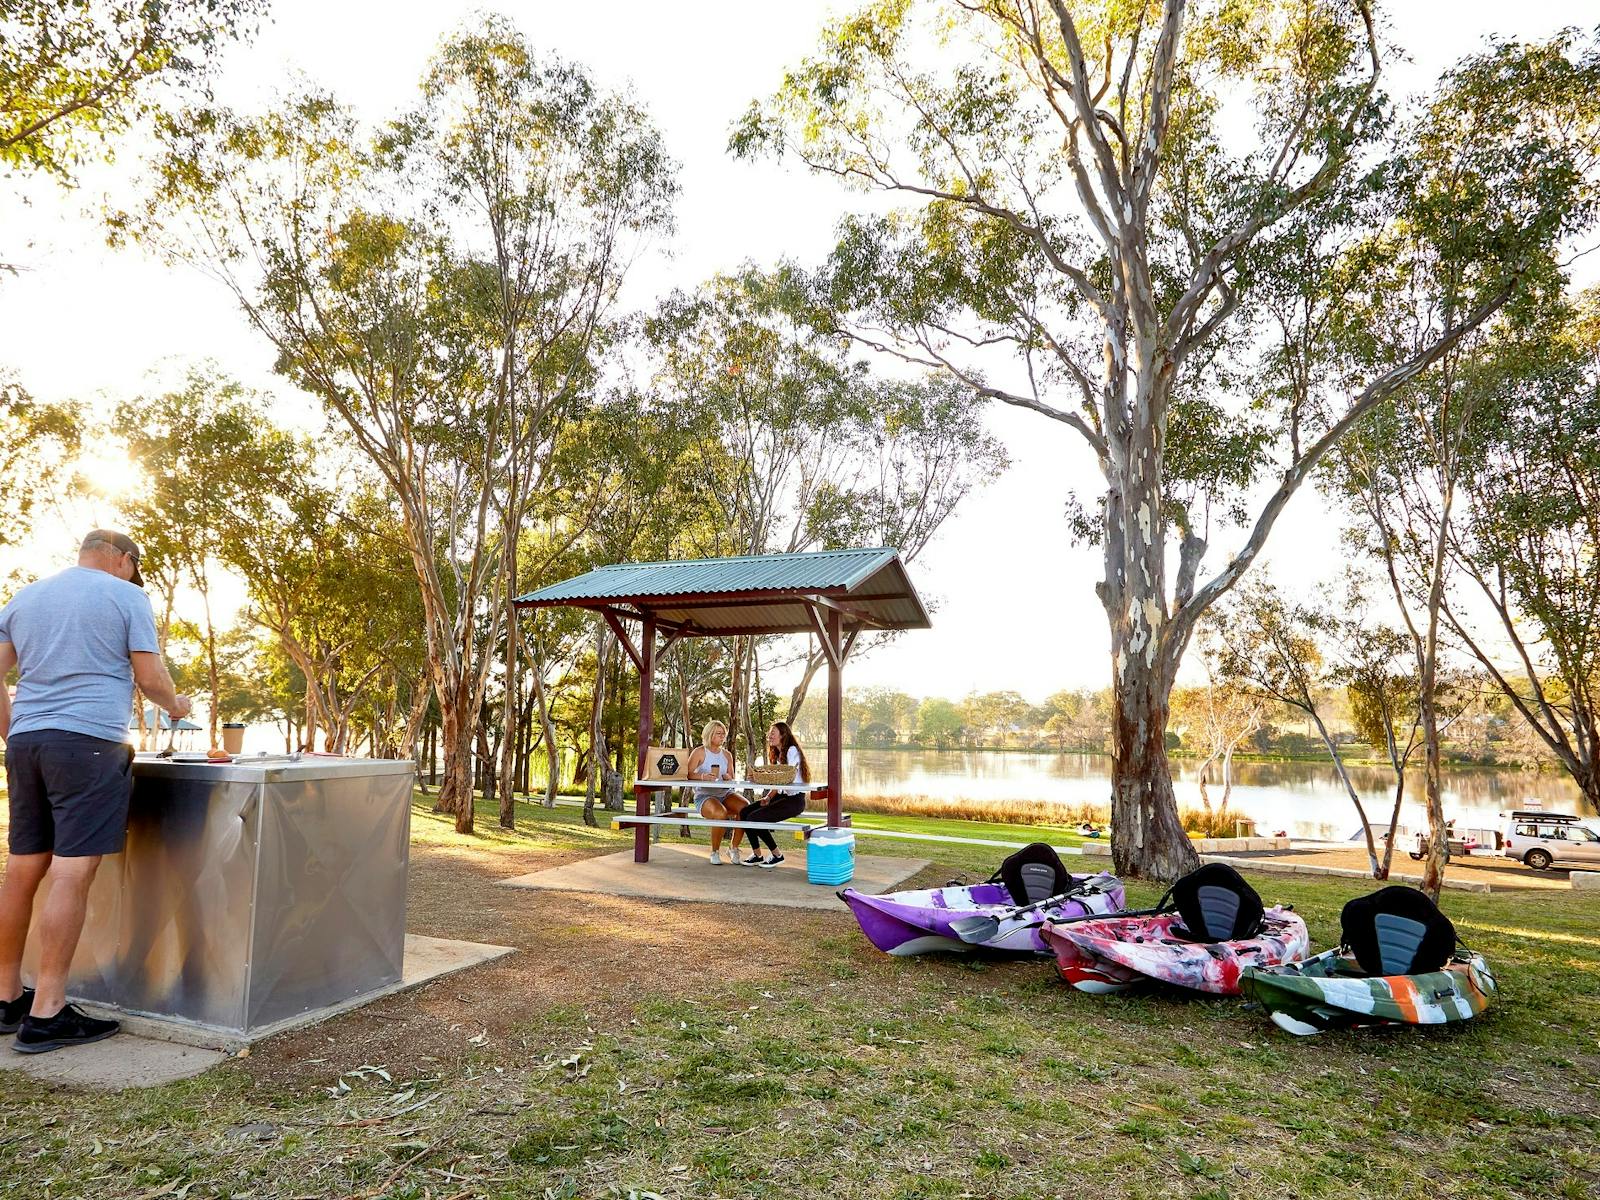 Lake Inverell Picnic area. Man at BBQ on left, two ladies sitting at Picnic Table on right.